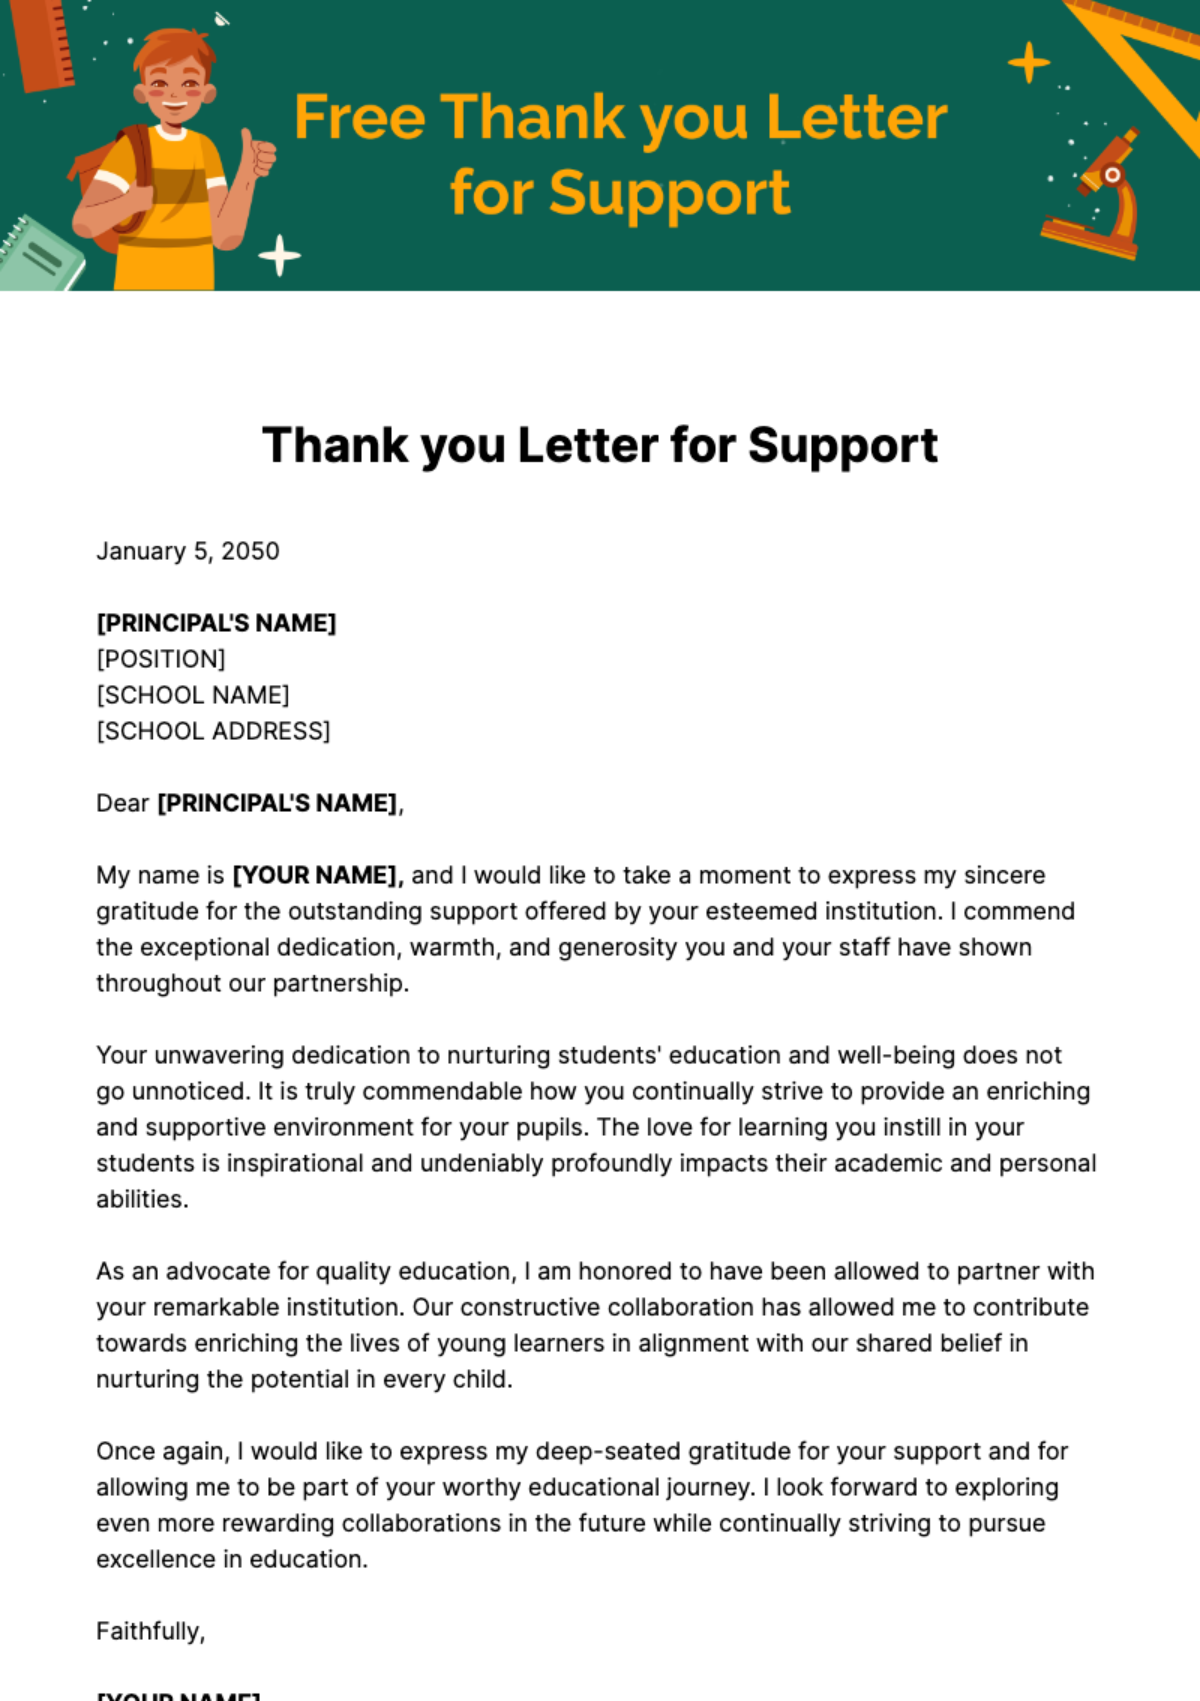 Thank you Letter for Support Template